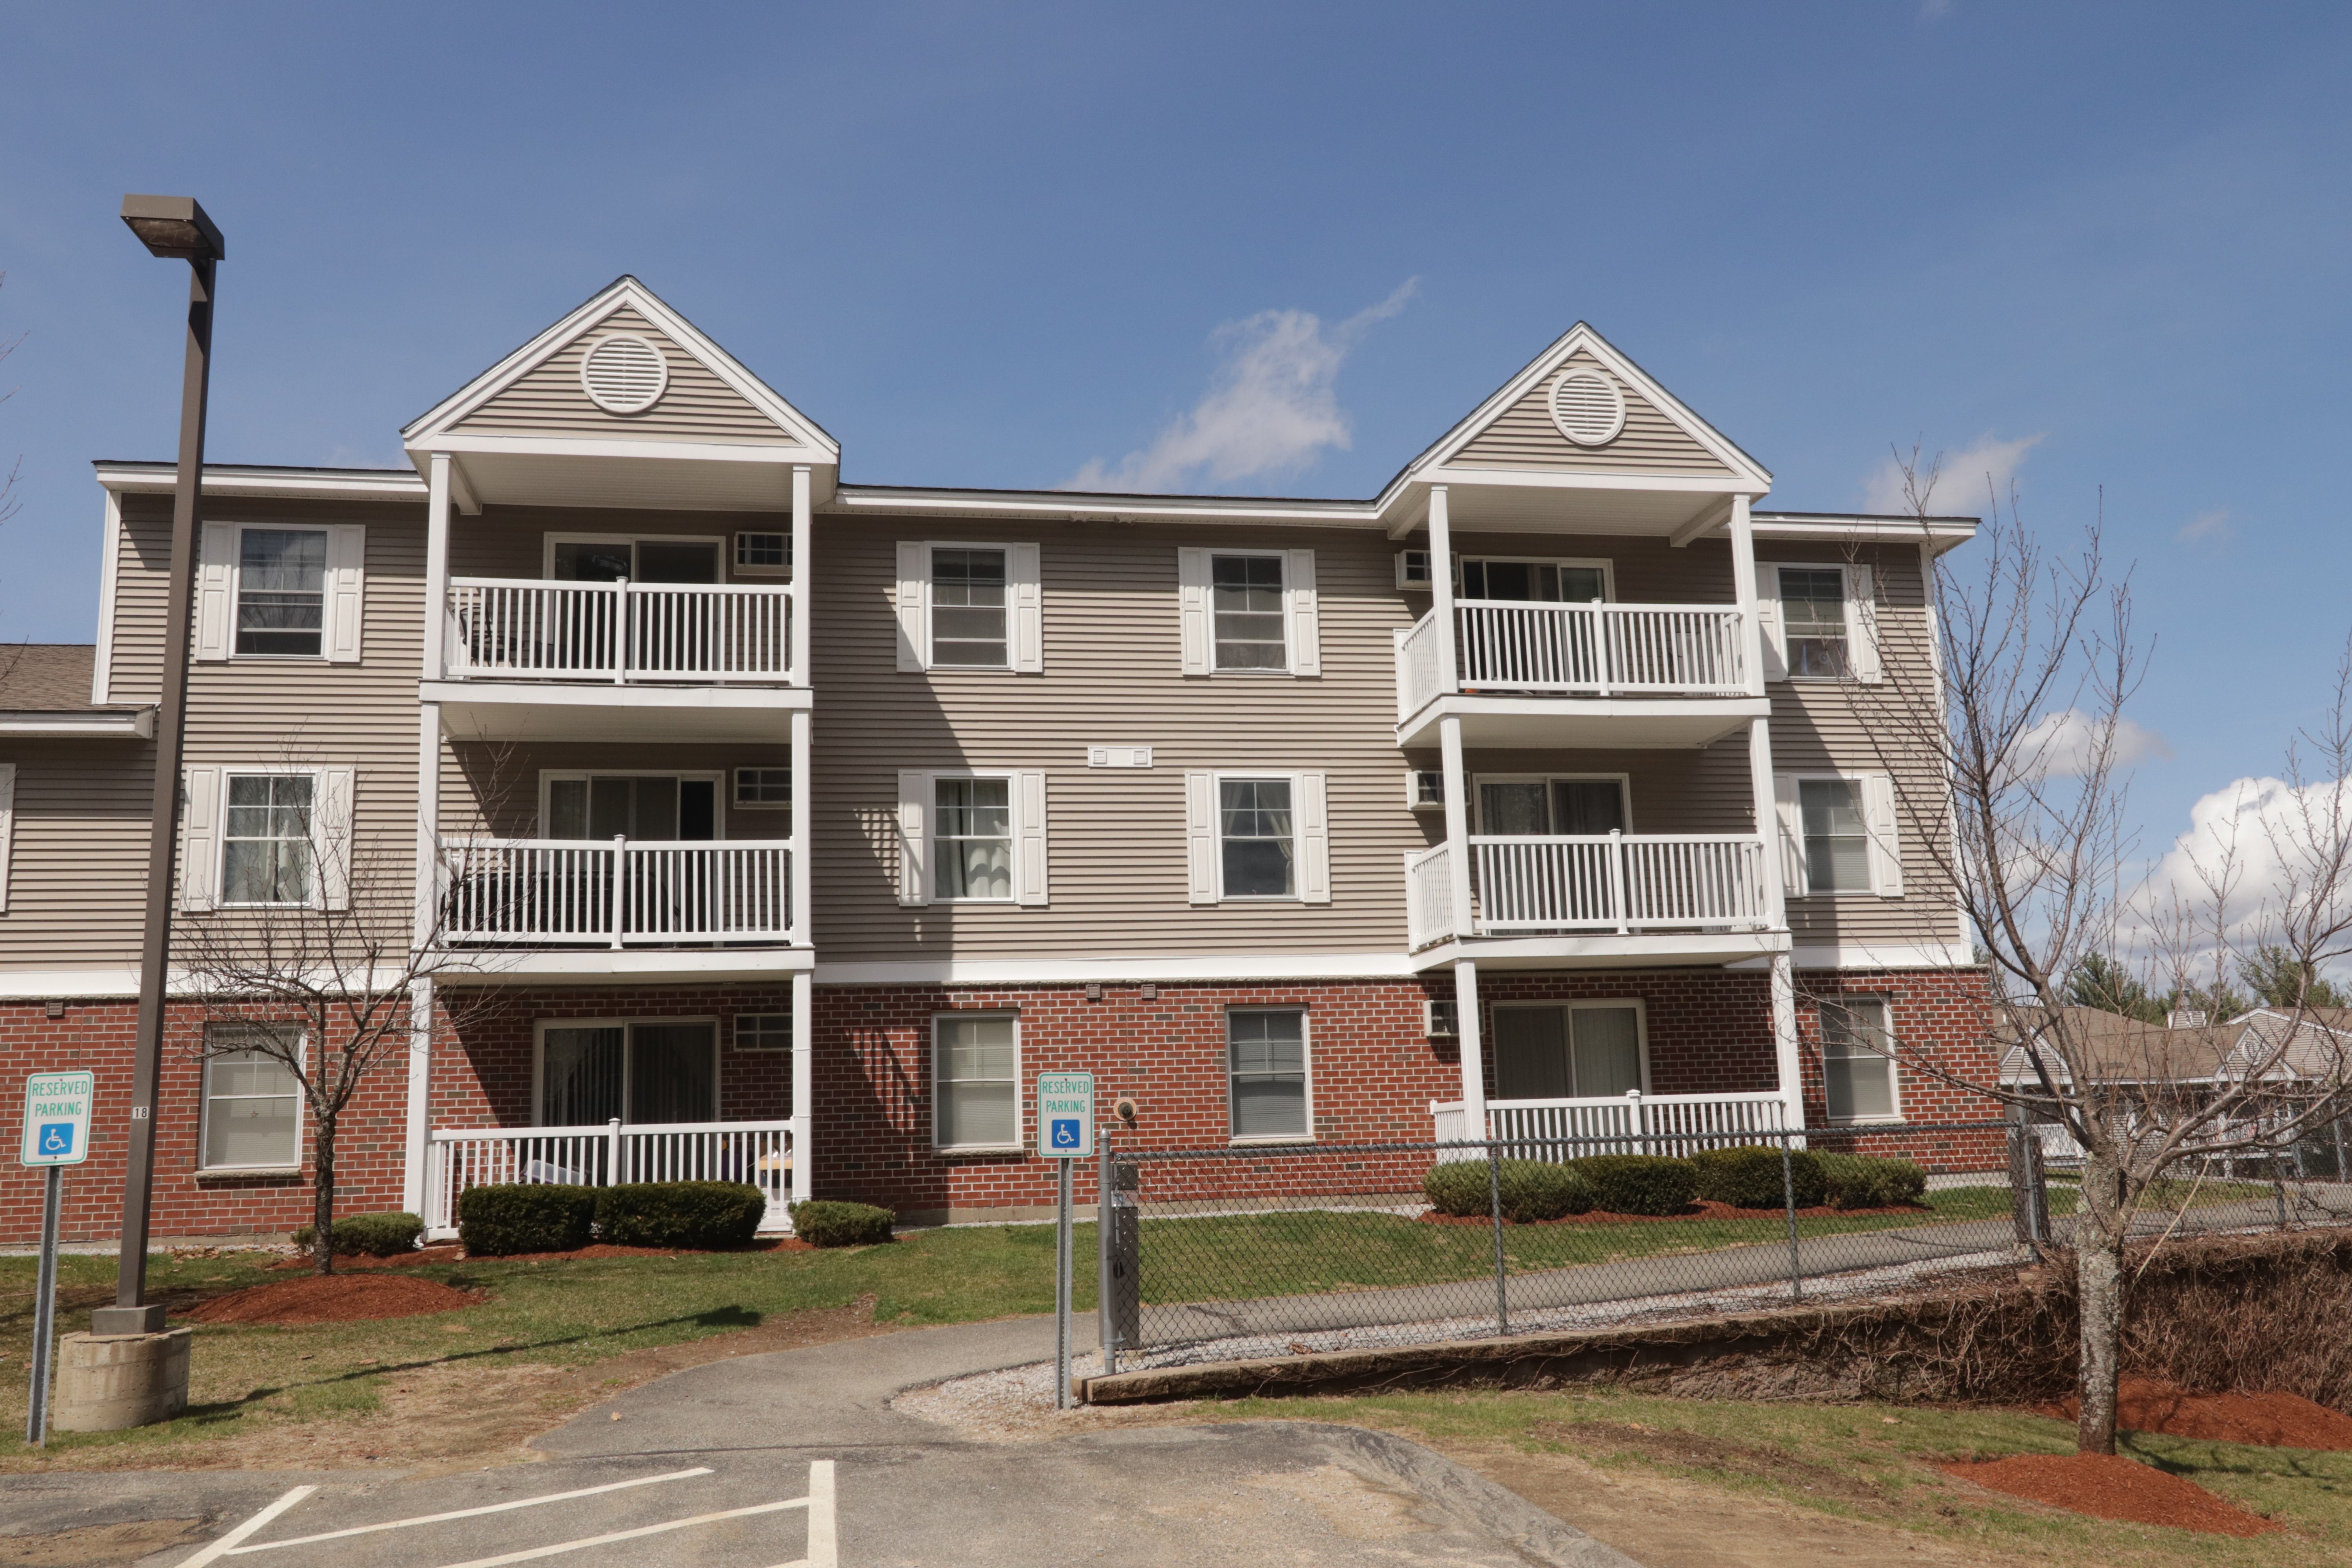 Milford condo for sale at Quarrywood Green 59 Ponemah Hill Rd Apt 2-LL2 Milford NH 03055